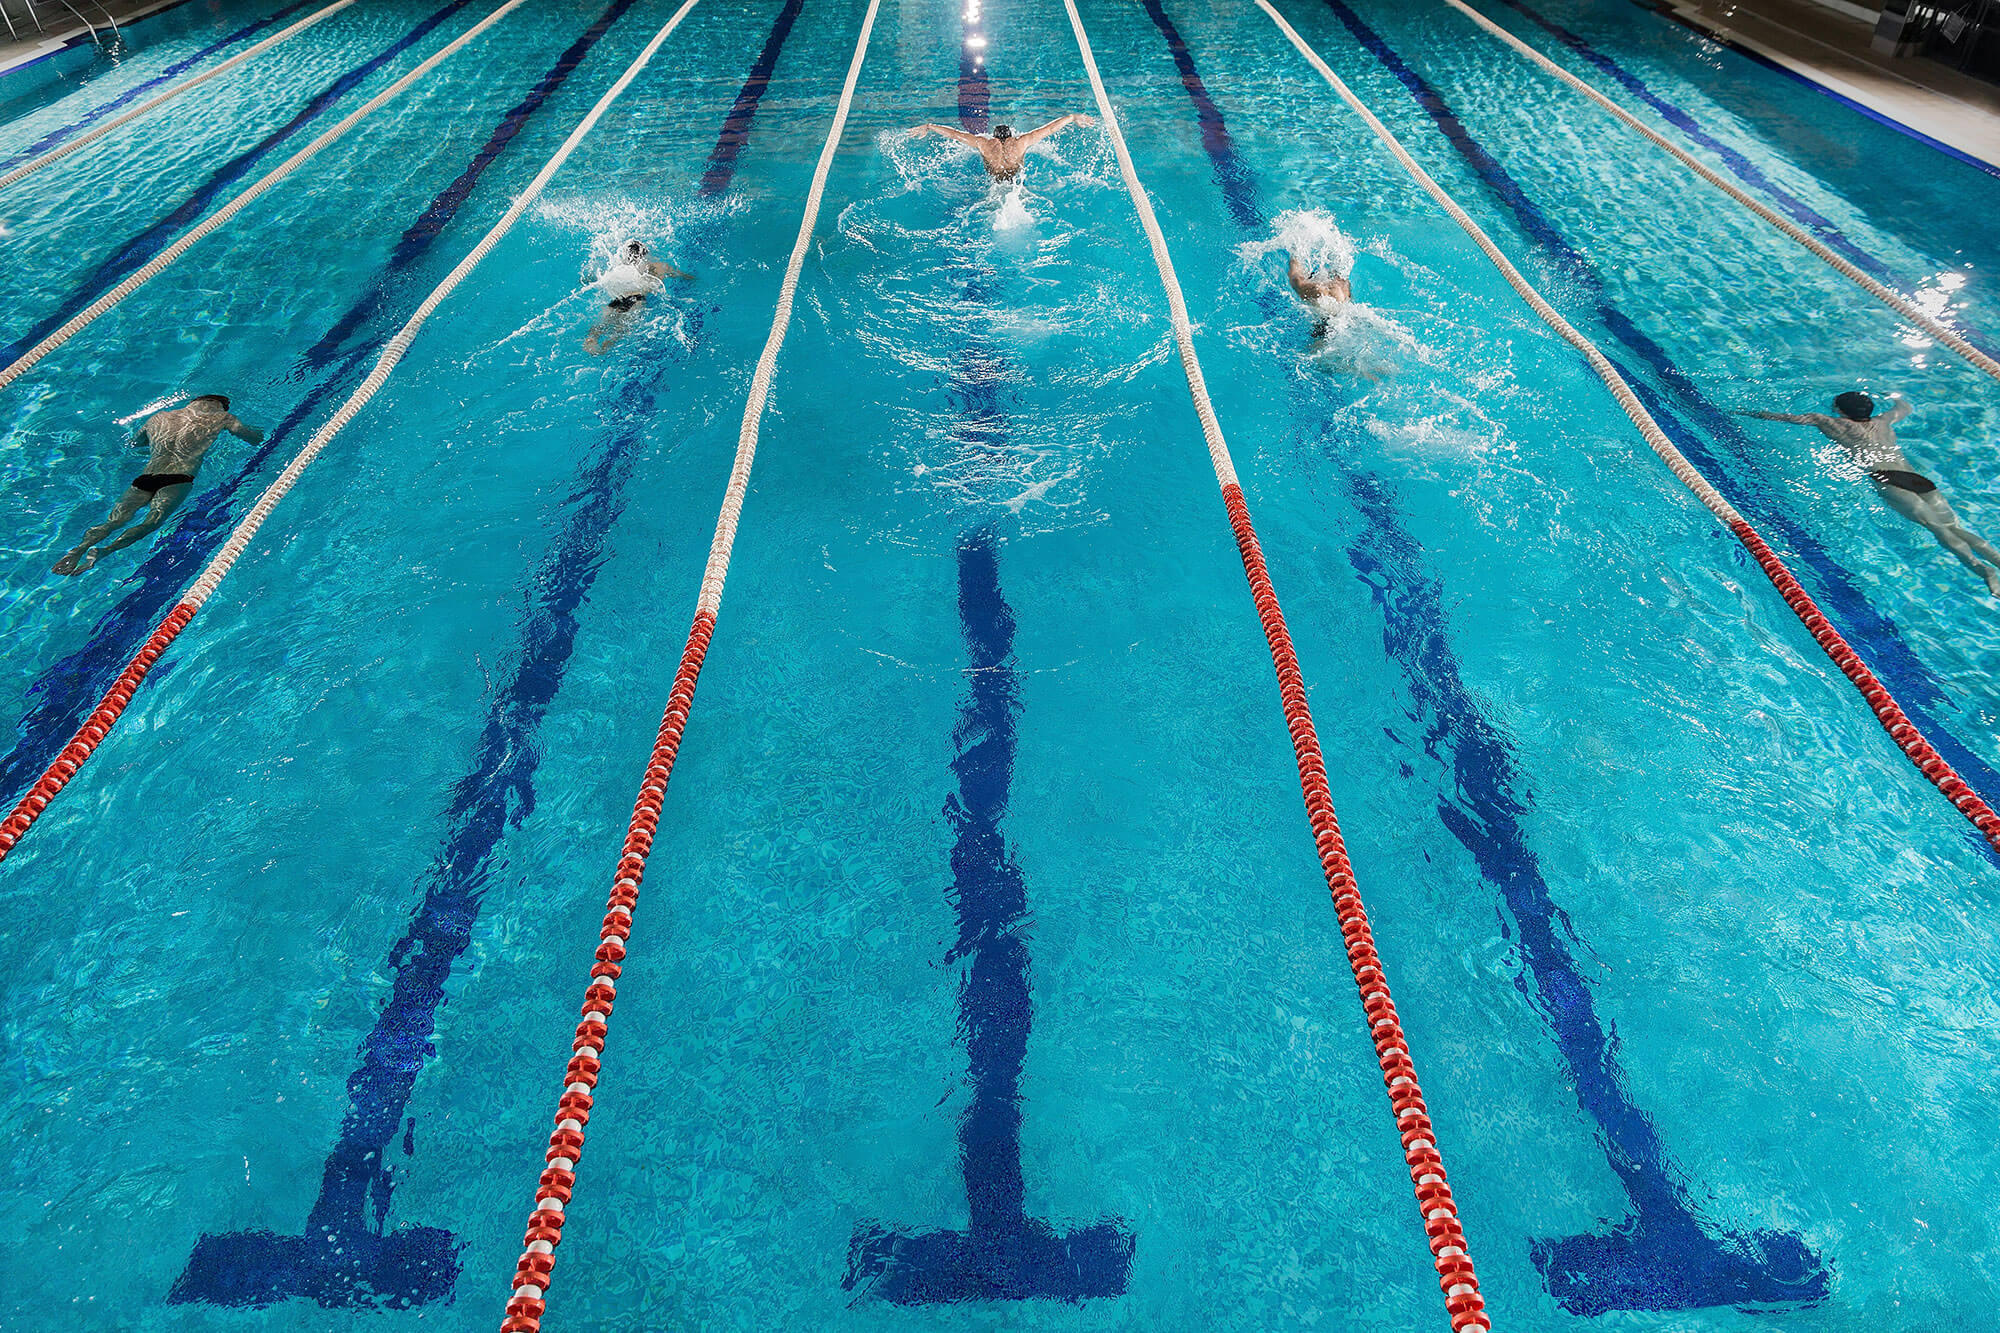 Five swimmers racing against each other in swiming pool